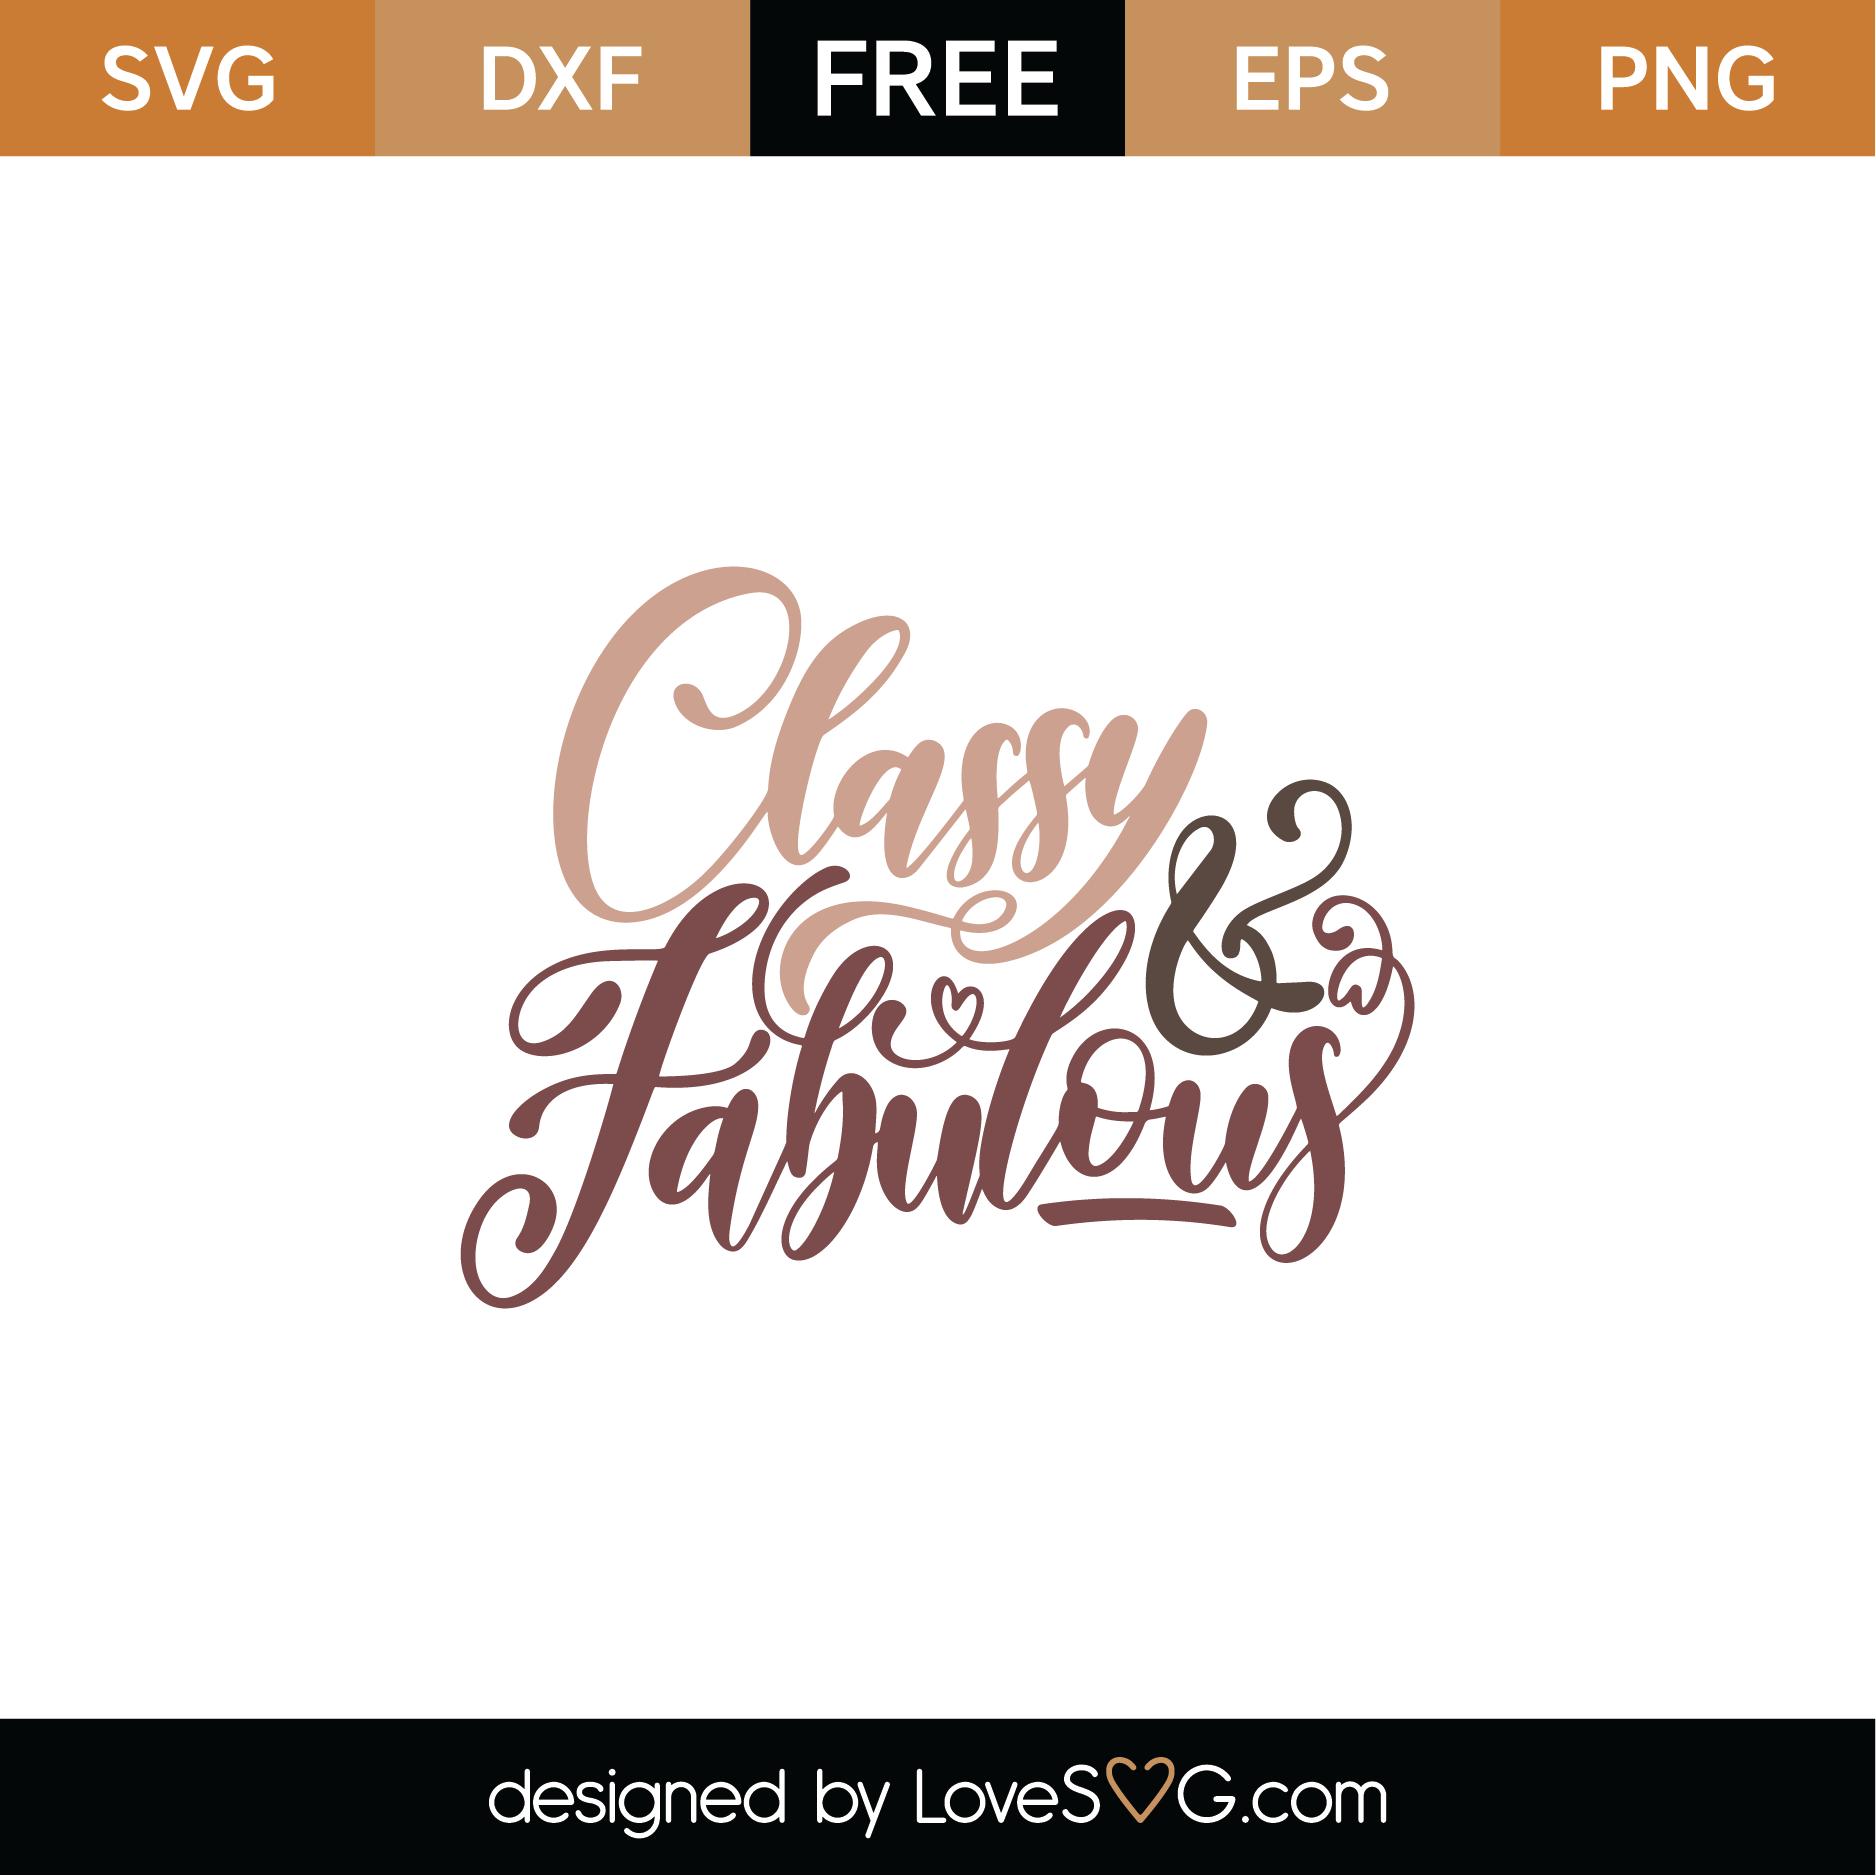 Download Free Classy and Fabulous SVG Cut File | Lovesvg.com